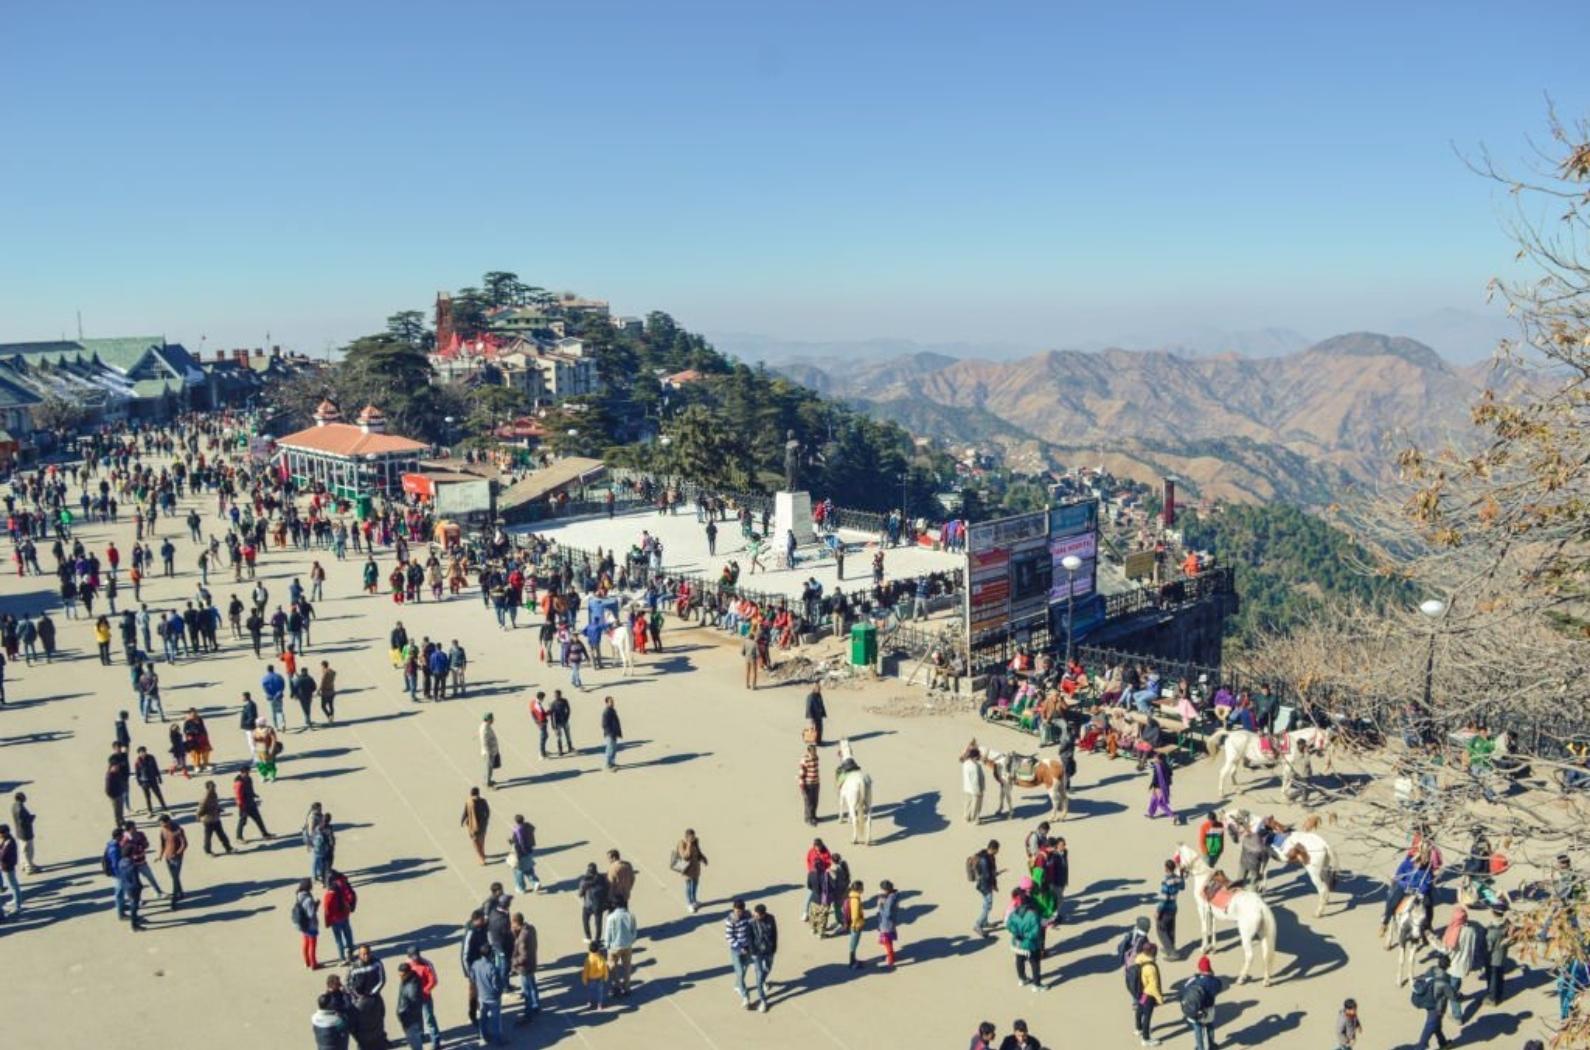 A famous place in shimla Ridge. People gatharing here.